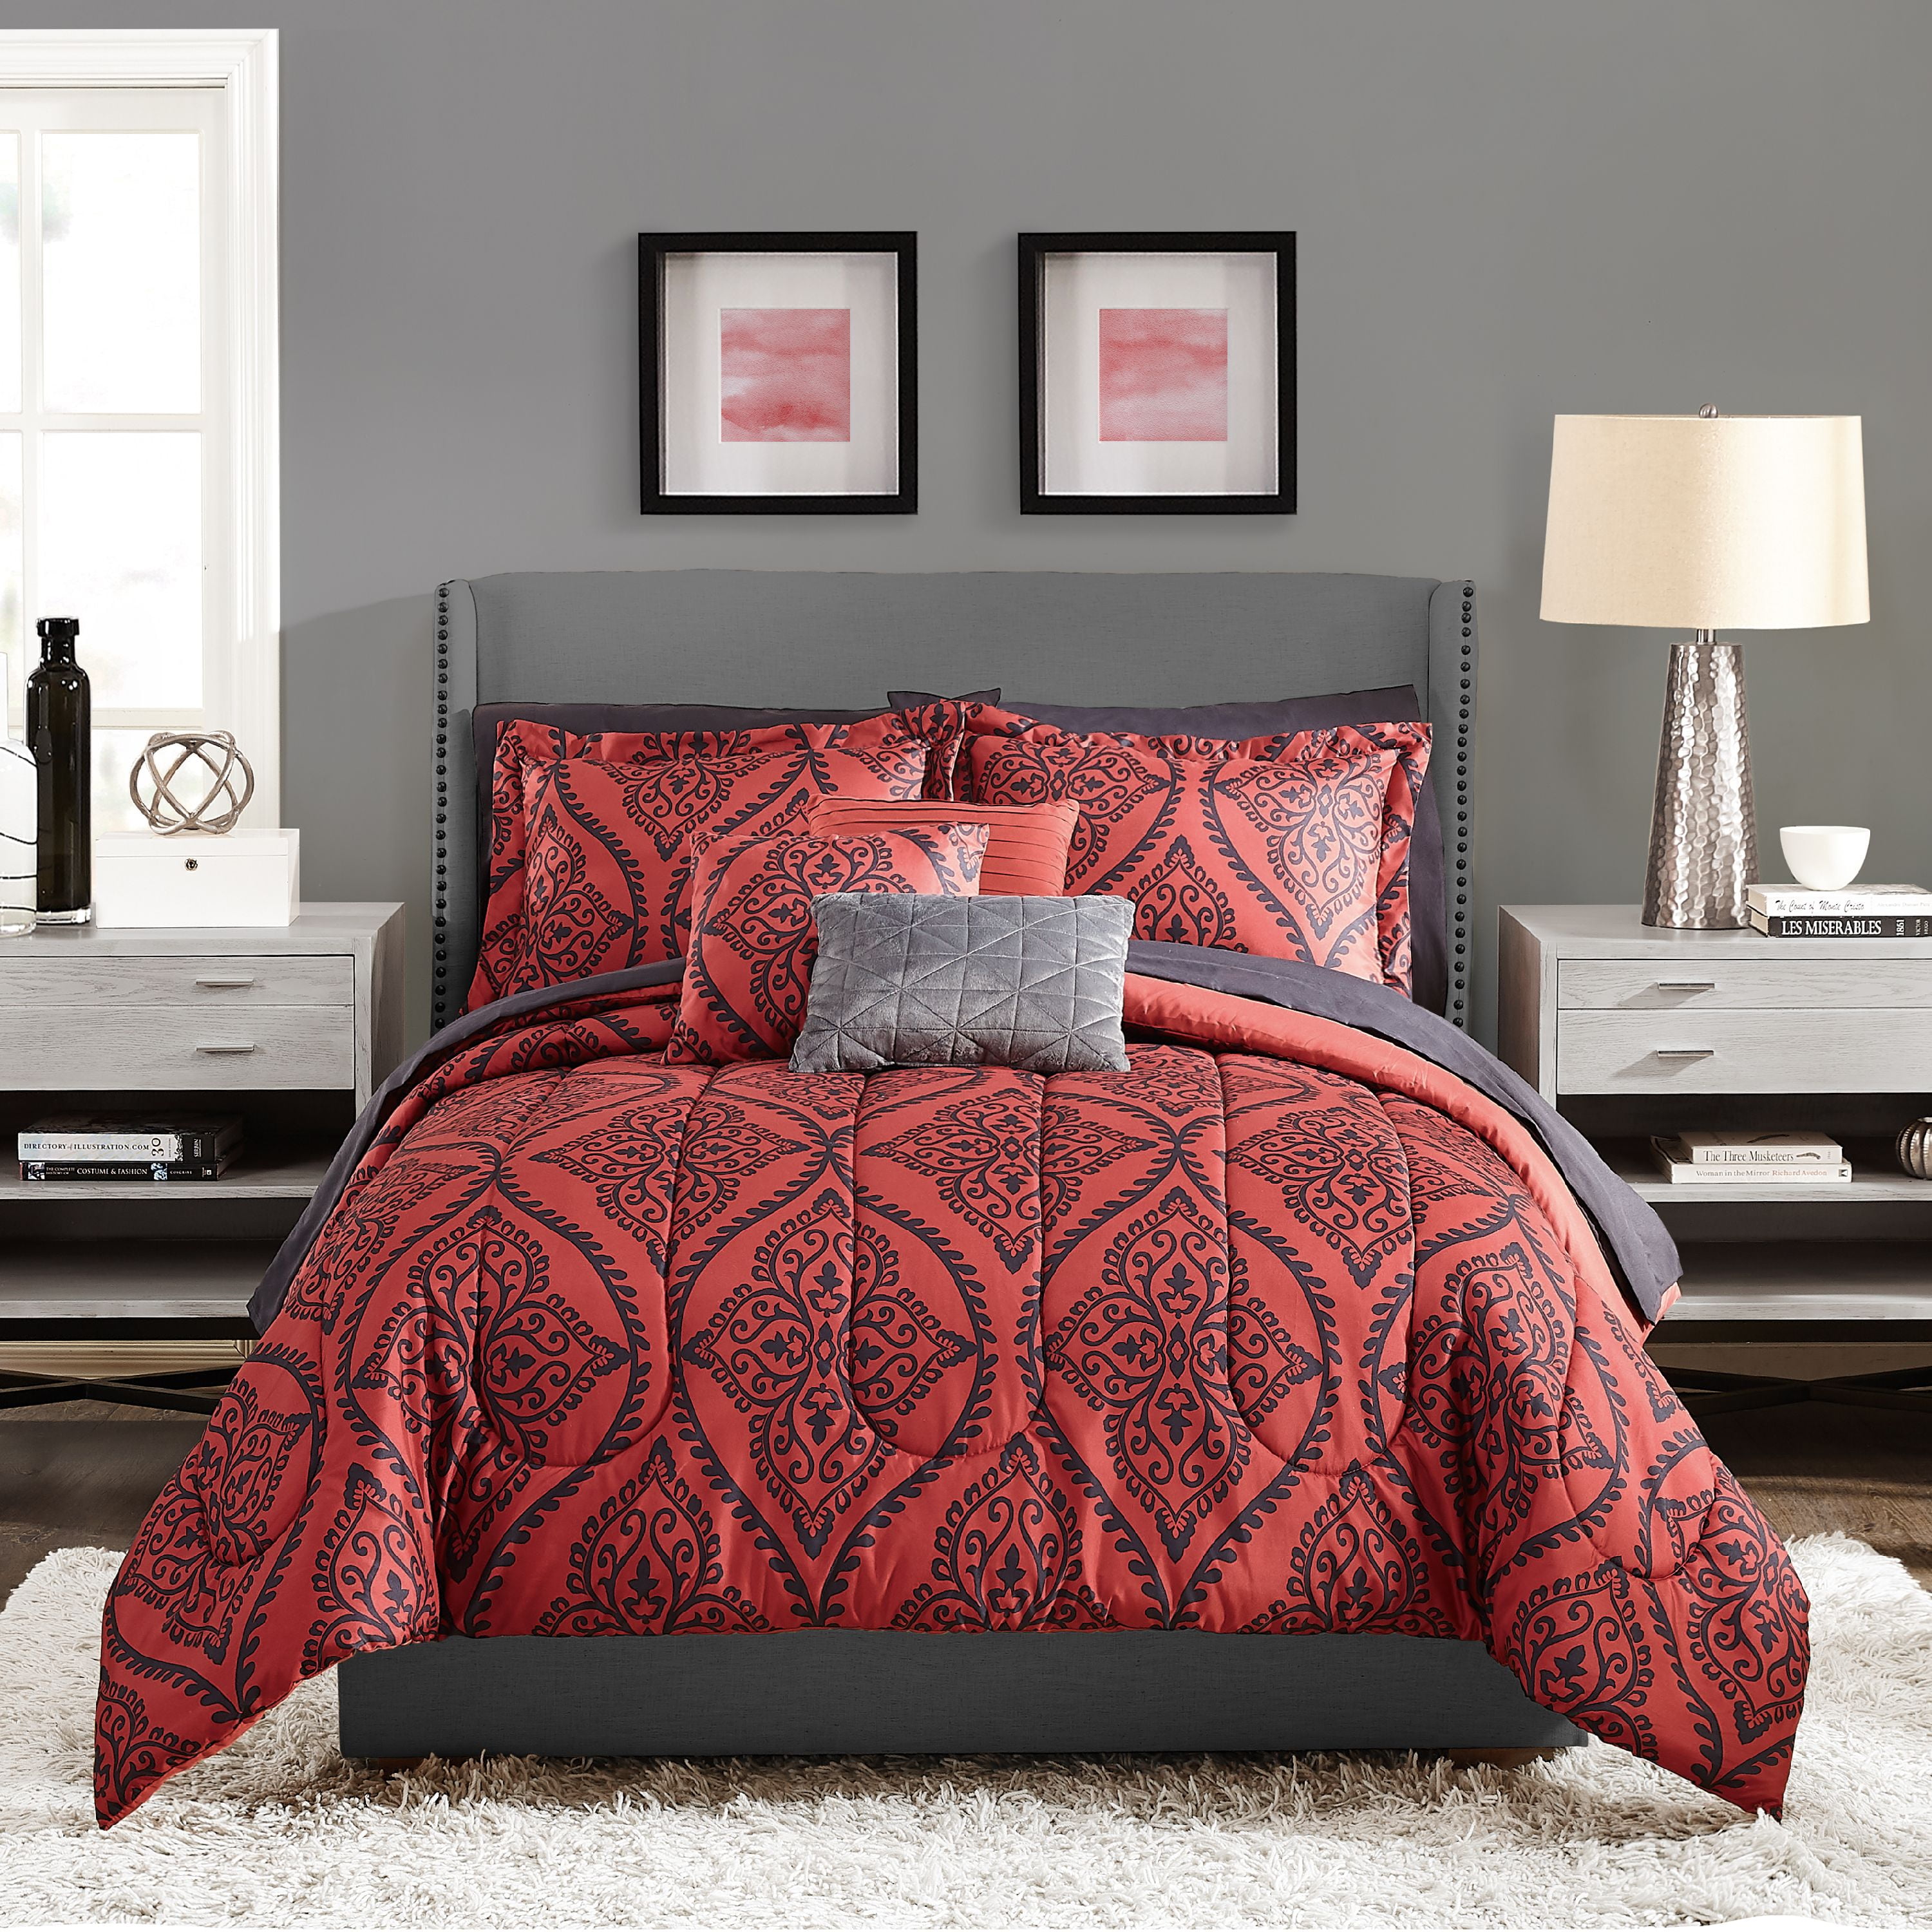 Mainstays Red and Black Damask 10 Piece Bed in a Bag Full Comforter Set With Sheets